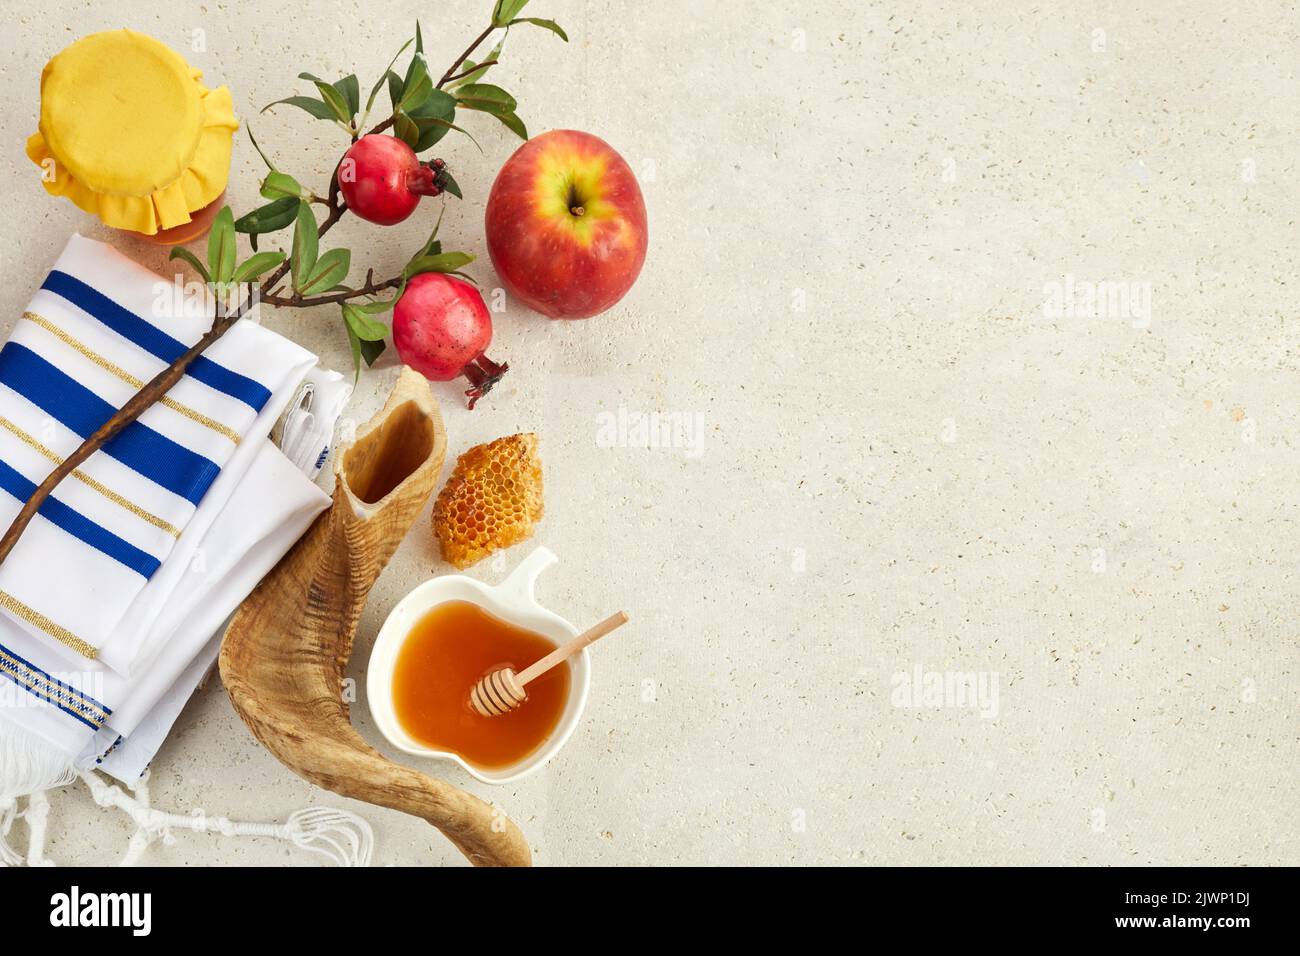 Rosh hashanah, jewish New Year holiday concept. Pomegranate, apples and honey traditional products for celebration Stock Photo